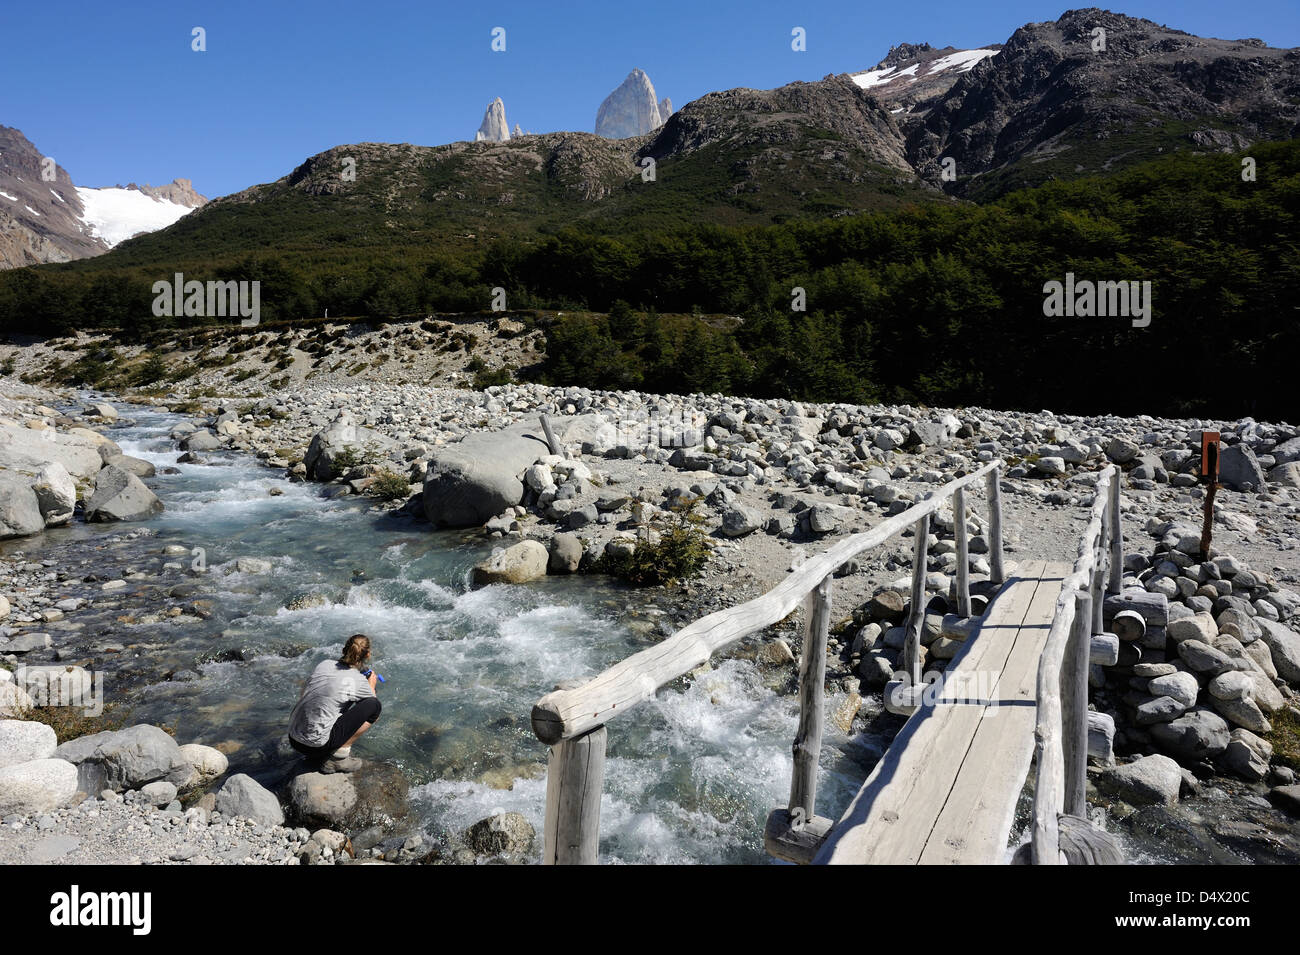 A walker fills her water bottle by a bridge over a stream in Los Glaciares National Park at the foot of the Fitzroy Range Stock Photo